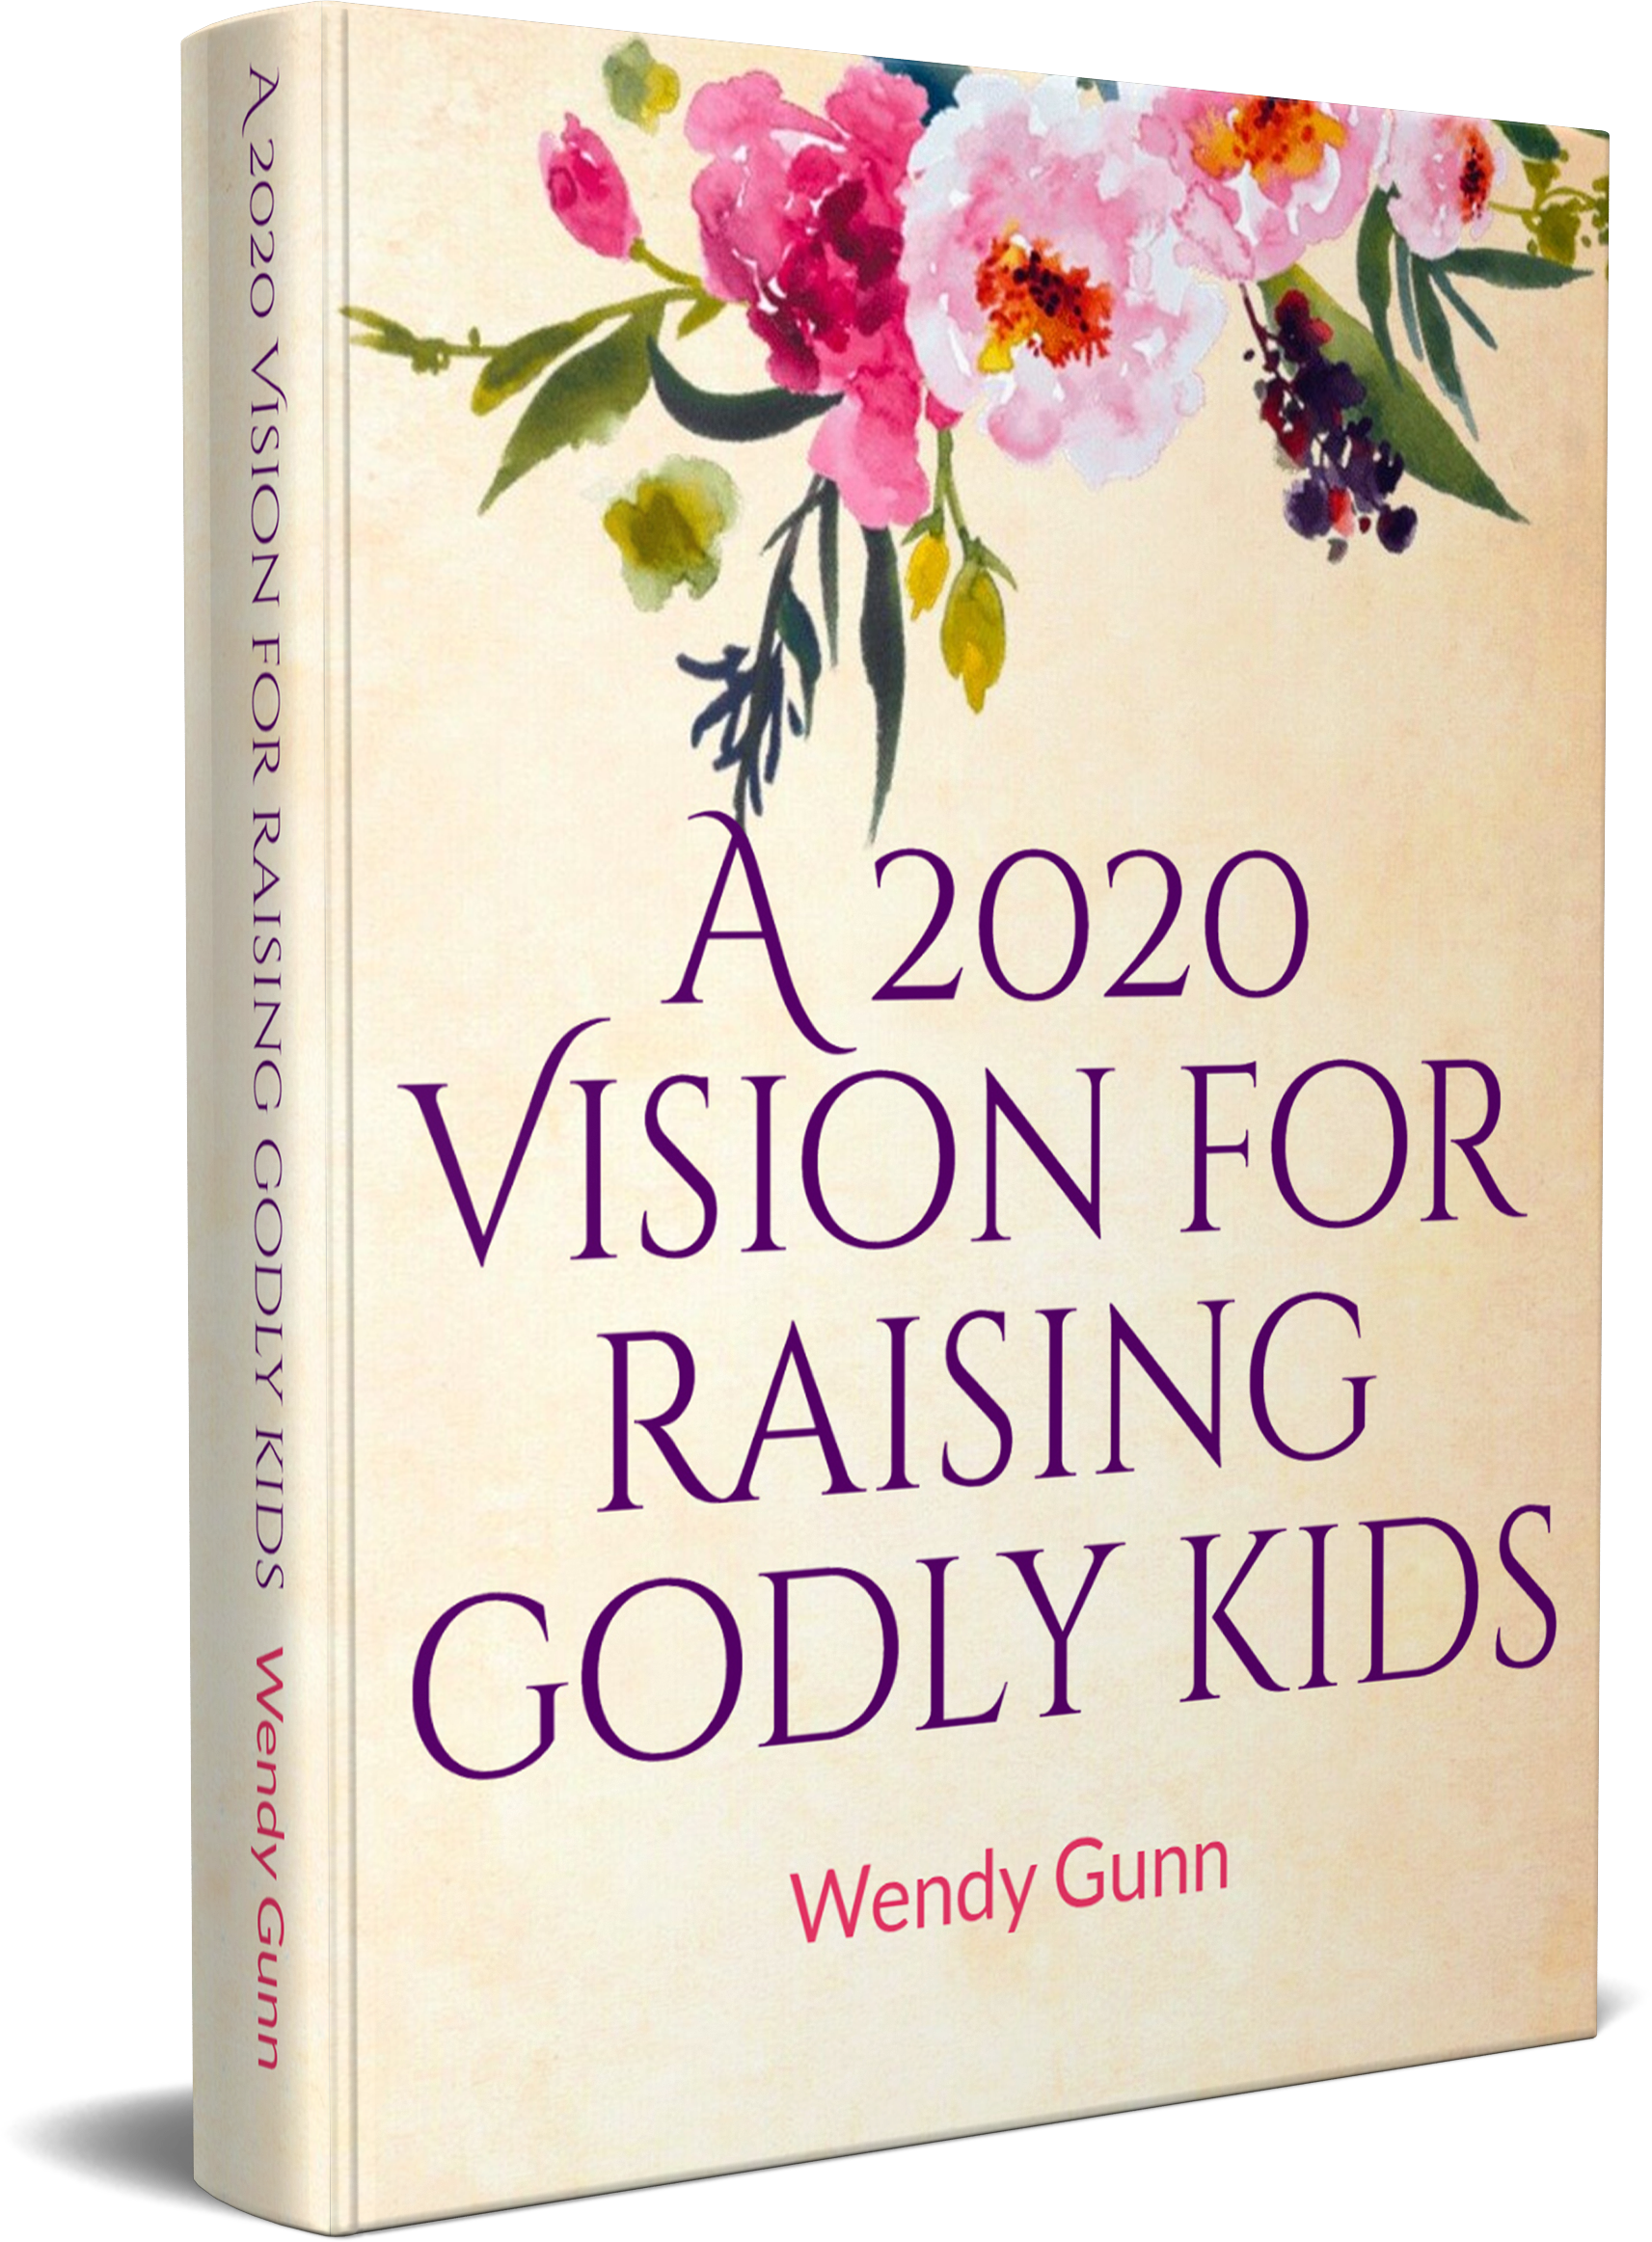 A 2020 Vision For Raising Godly Kids by Wendy Gunn